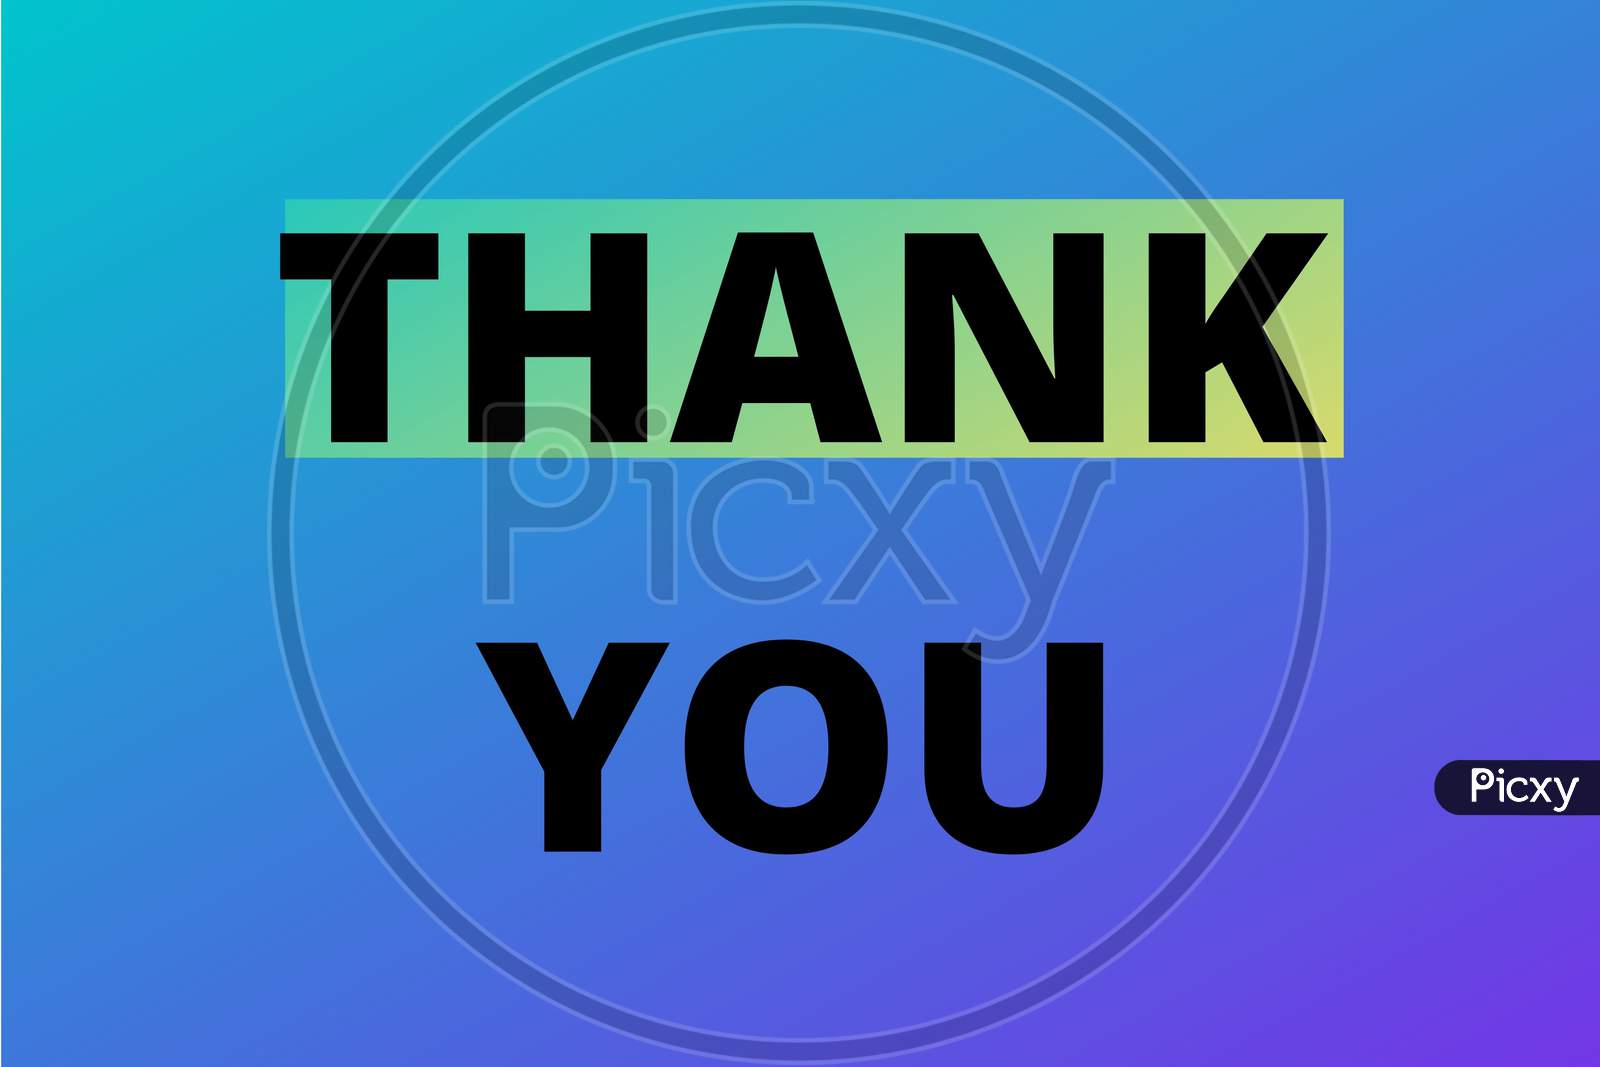 Thank You Poster With Spectrum Brush Strokes With Gradient Background